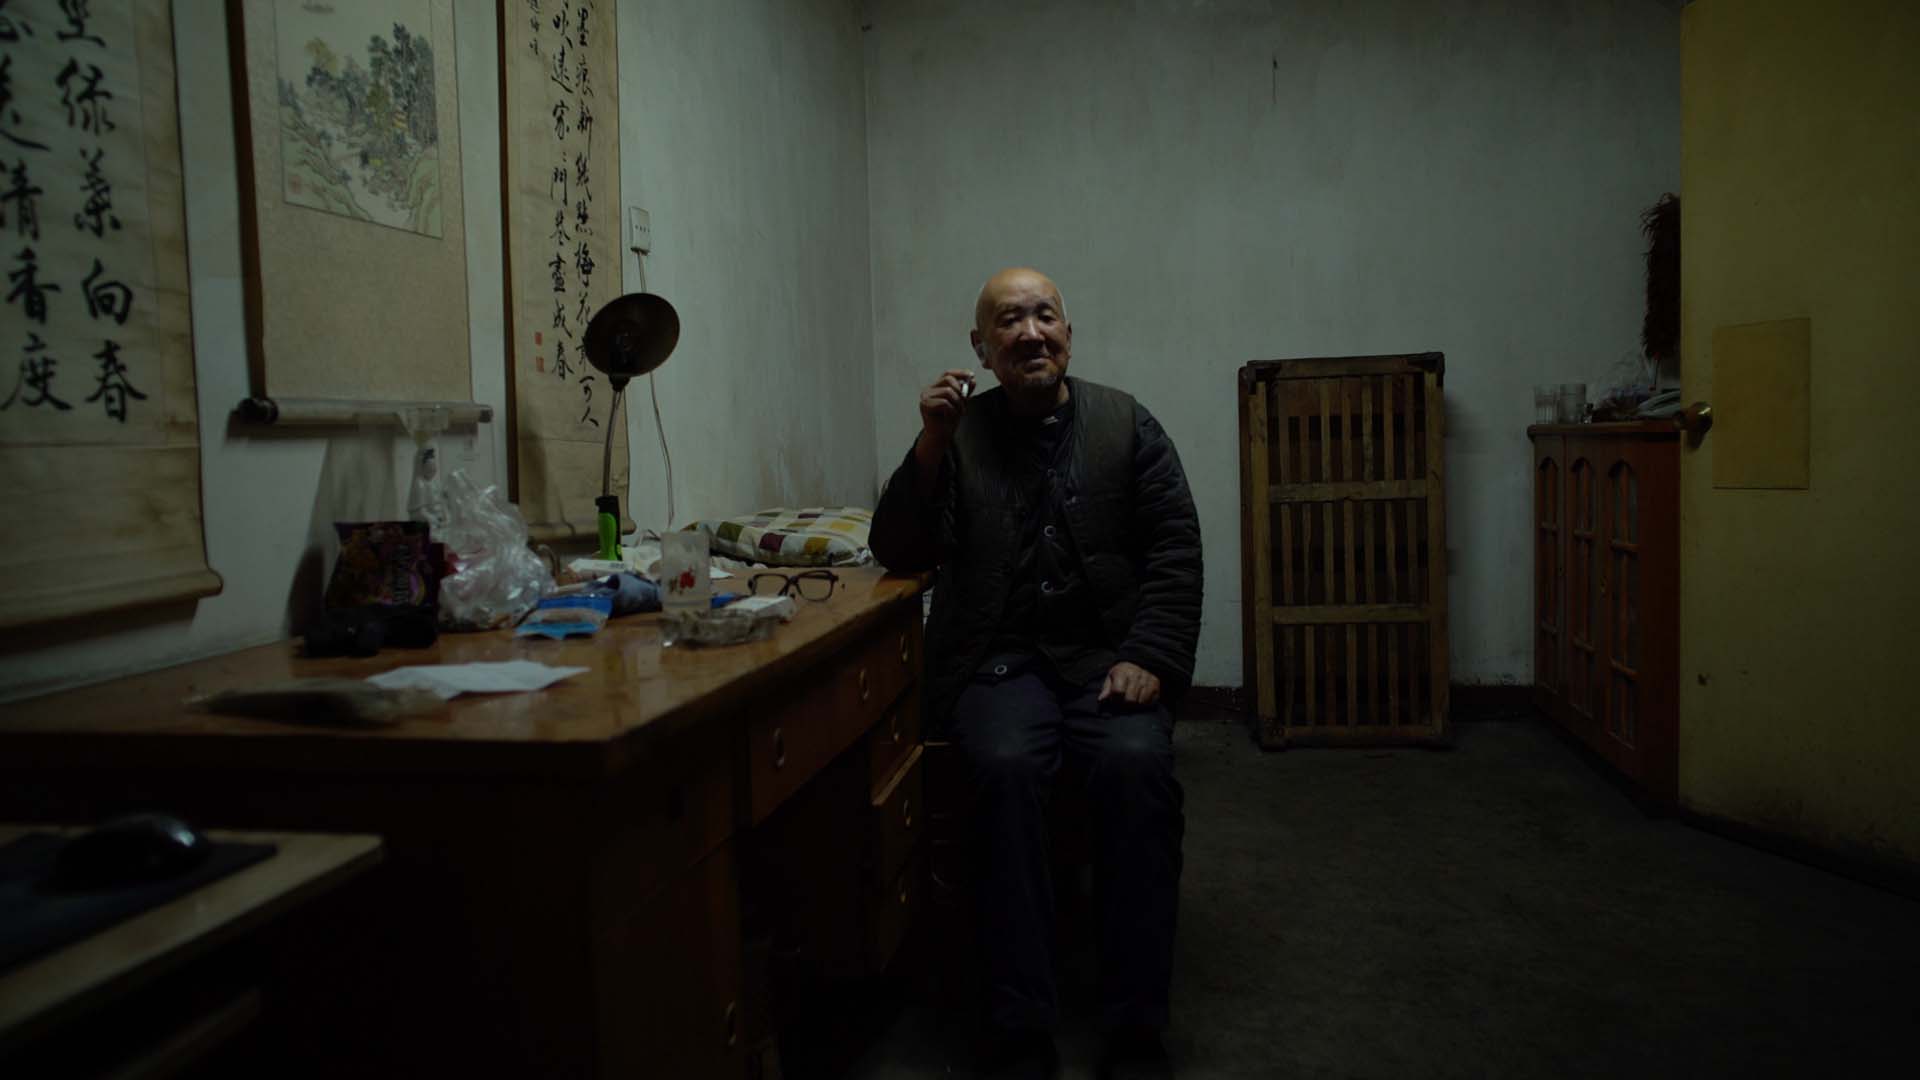 An old man in Dead Souls is sitting in a relatively dark room